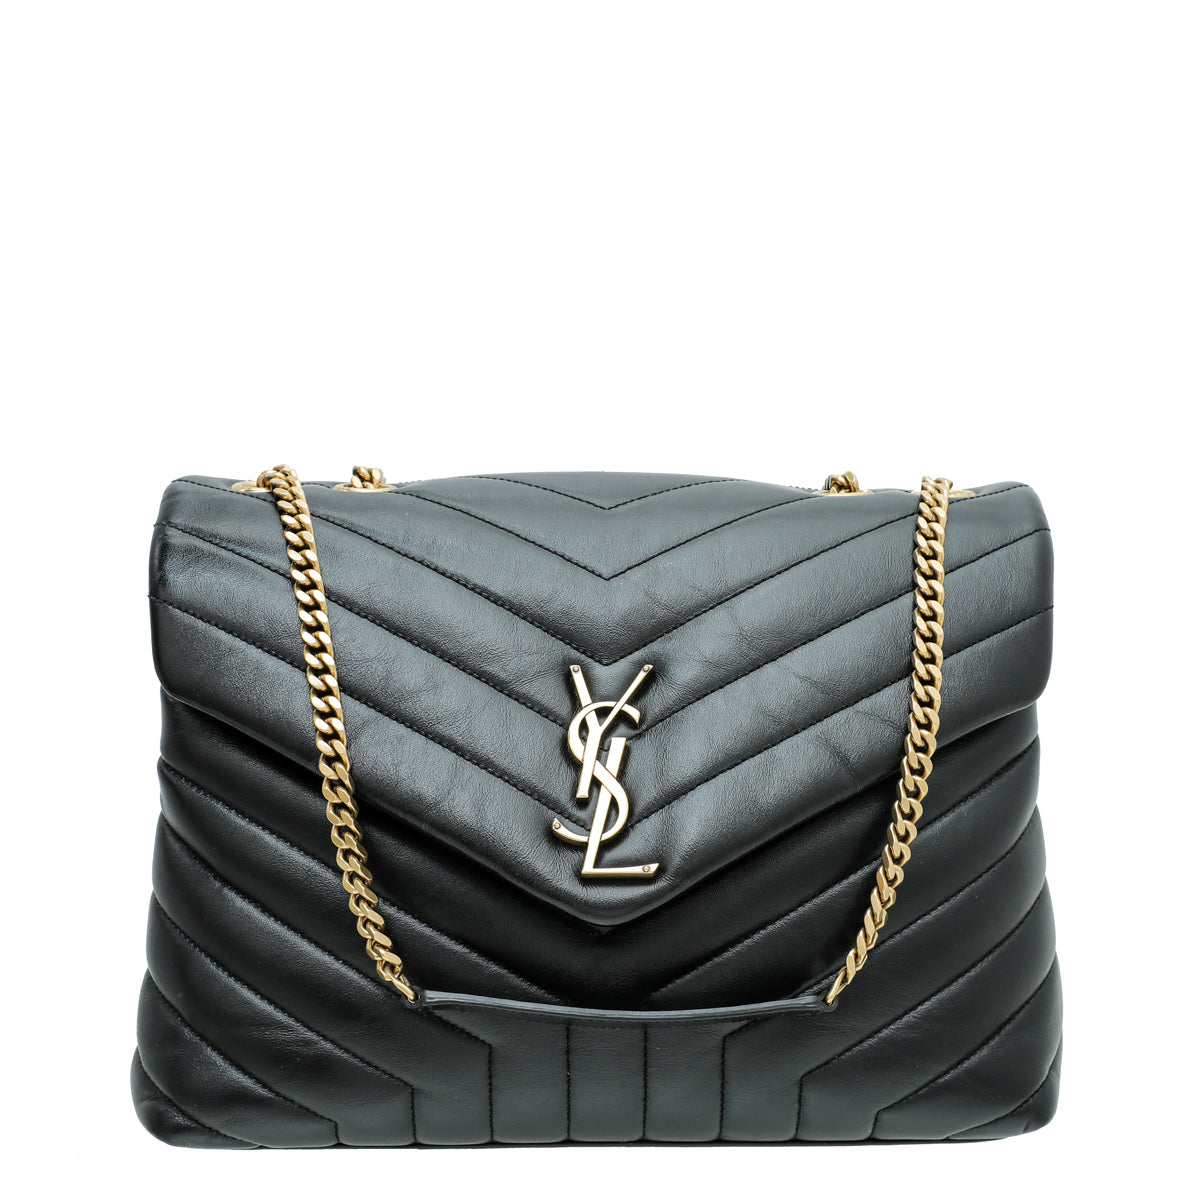 YSL Saint Laurent black leather tote | Best tote bags, Ysl tote bag,  Fashion bags